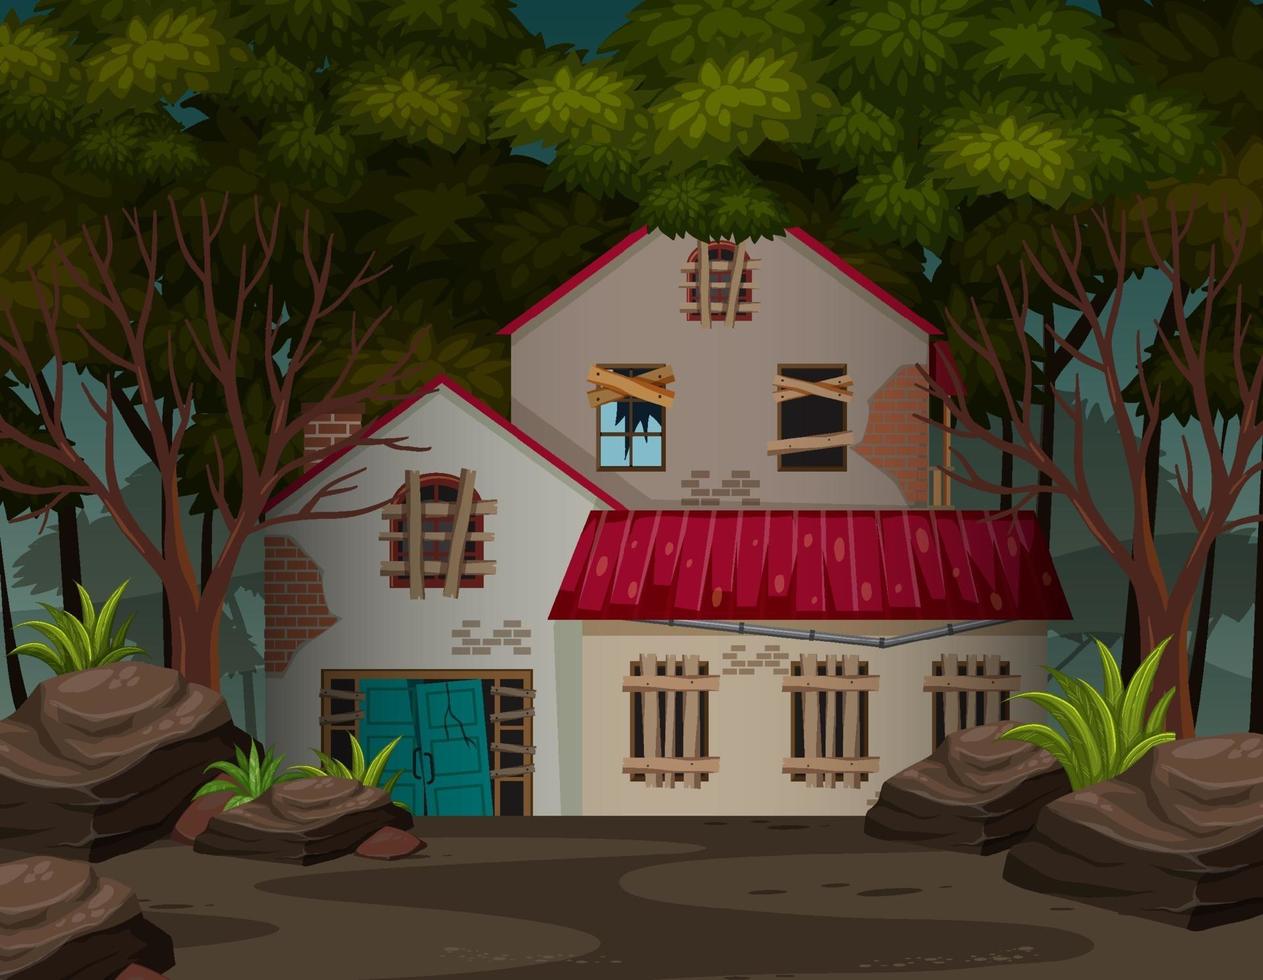 Scene with abandoned house in the dark forest vector